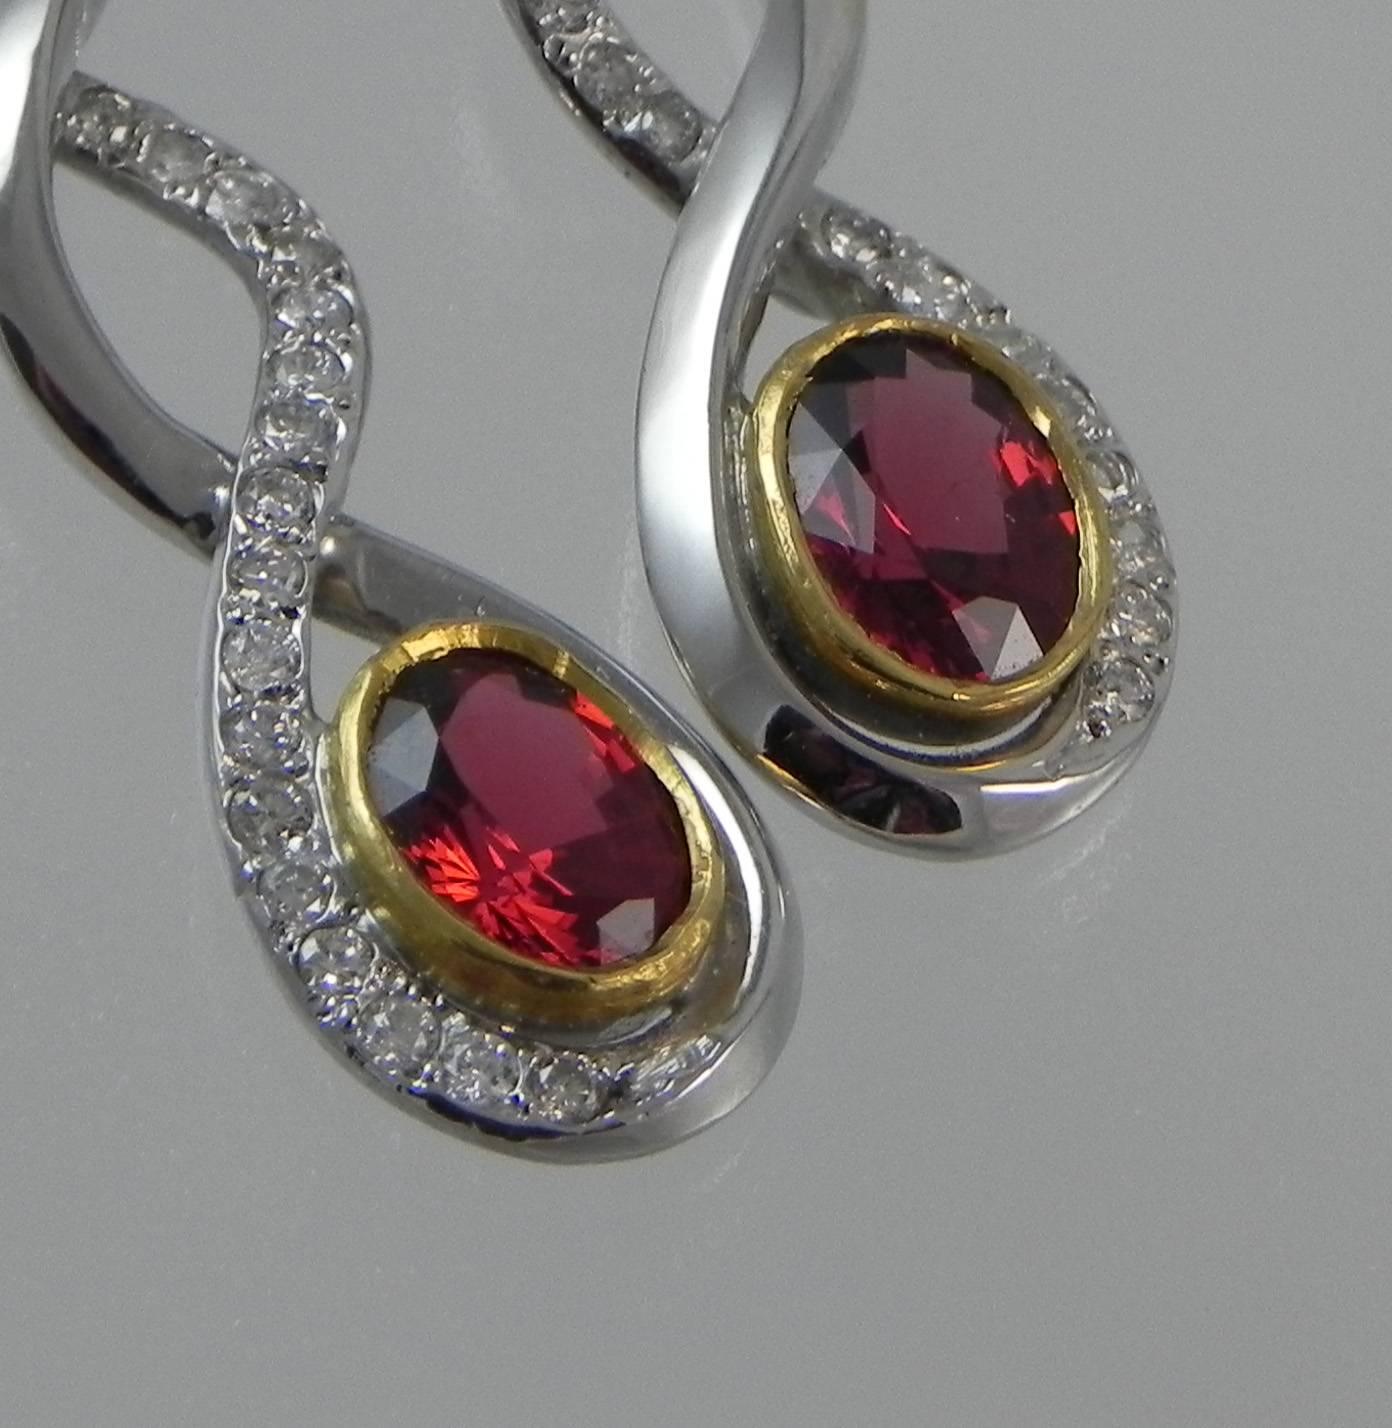 18KT White gold one of a kind earrings by Colorado’s Premier Jewelry Design Studio and Master Craftsman- Steven M. Parks.  Not only are the earrings a craftsman’s classic, but the Red Spinels he used to create them could only be one of Nature’s